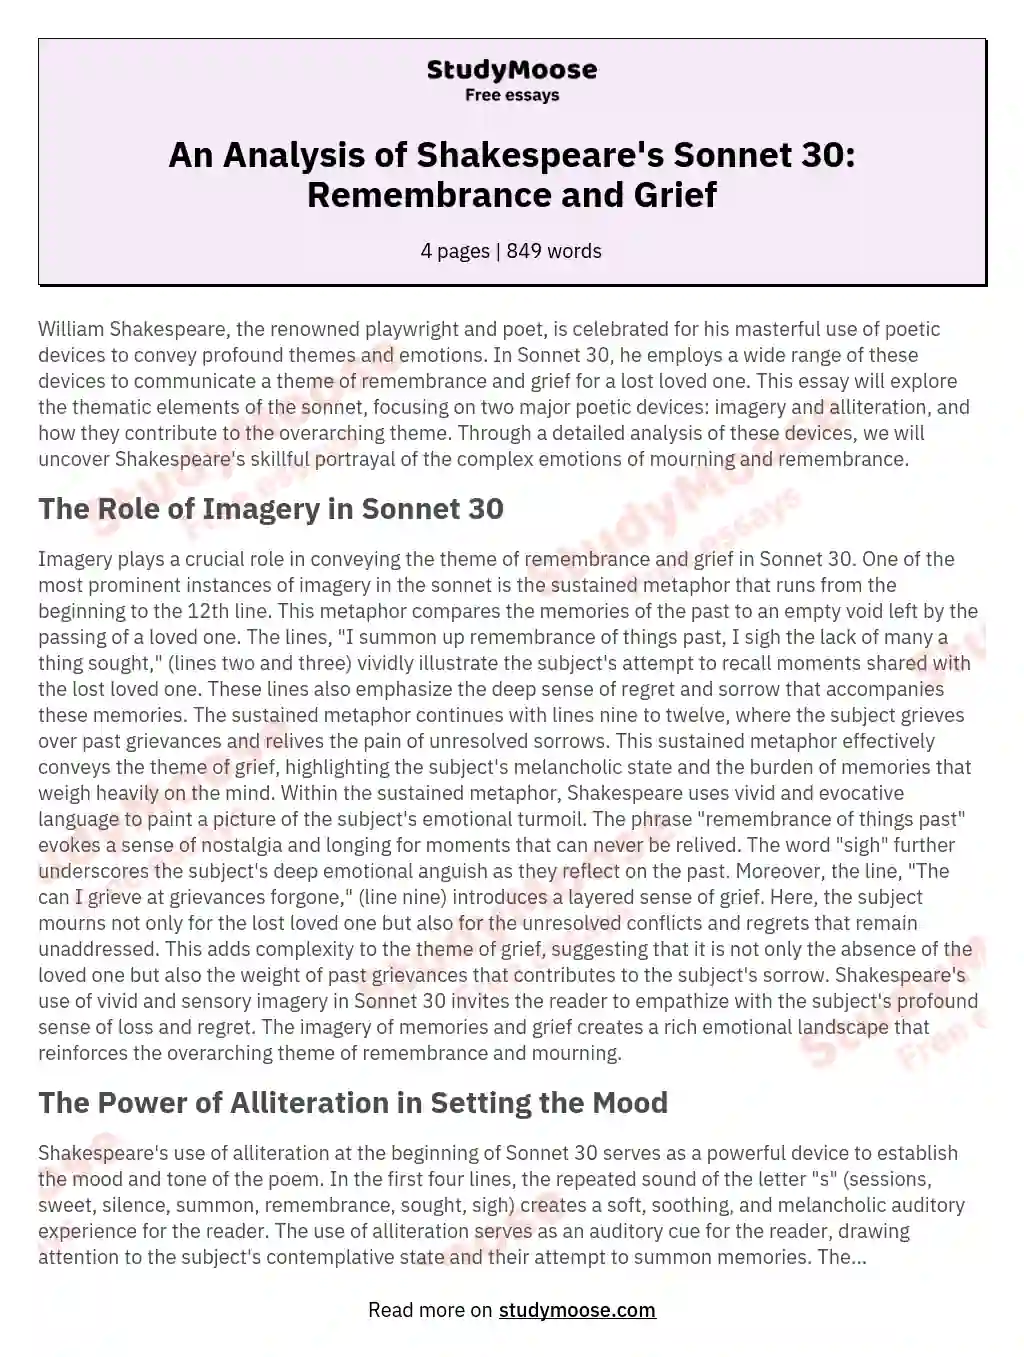 An Analysis of Shakespeare's Sonnet 30: Remembrance and Grief essay